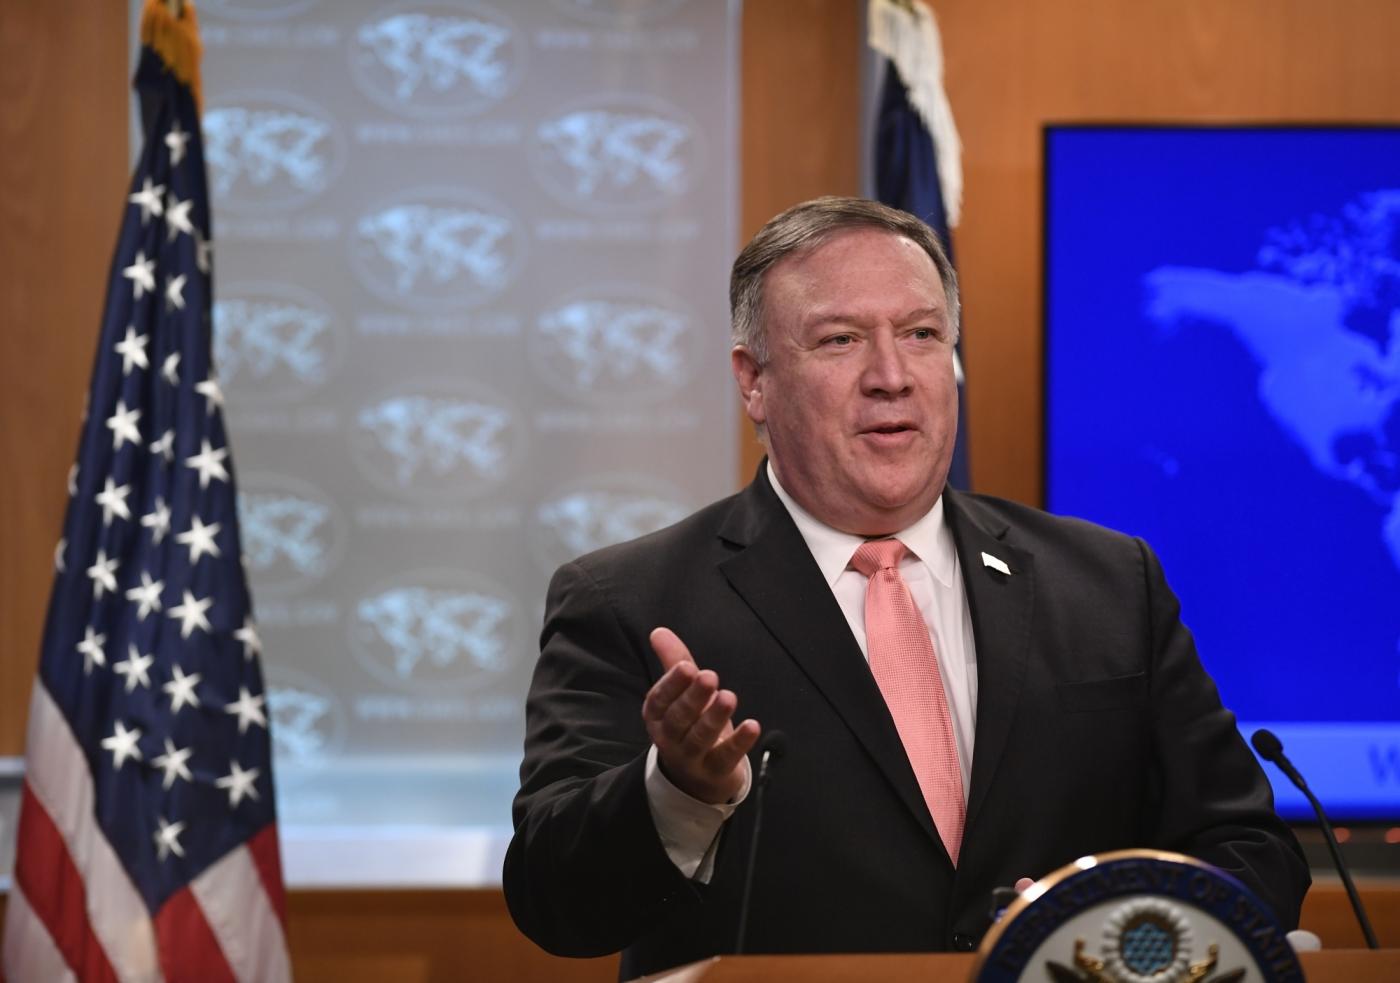 WASHINGTON, Oct. 24, 2018 (Xinhua) -- U.S. Secretary of State Mike Pompeo speaks during a press briefing in Washington D.C., the United States, Oct. 23, 2018. The United States is revoking visas of Saudi officials suspected of involvement in the death of Saudi journalist Jamal Khashoggi, said U.S. Secretary of State Mike Pompeo on Tuesday. (Xinhua/Liu Jie/IANS) by .